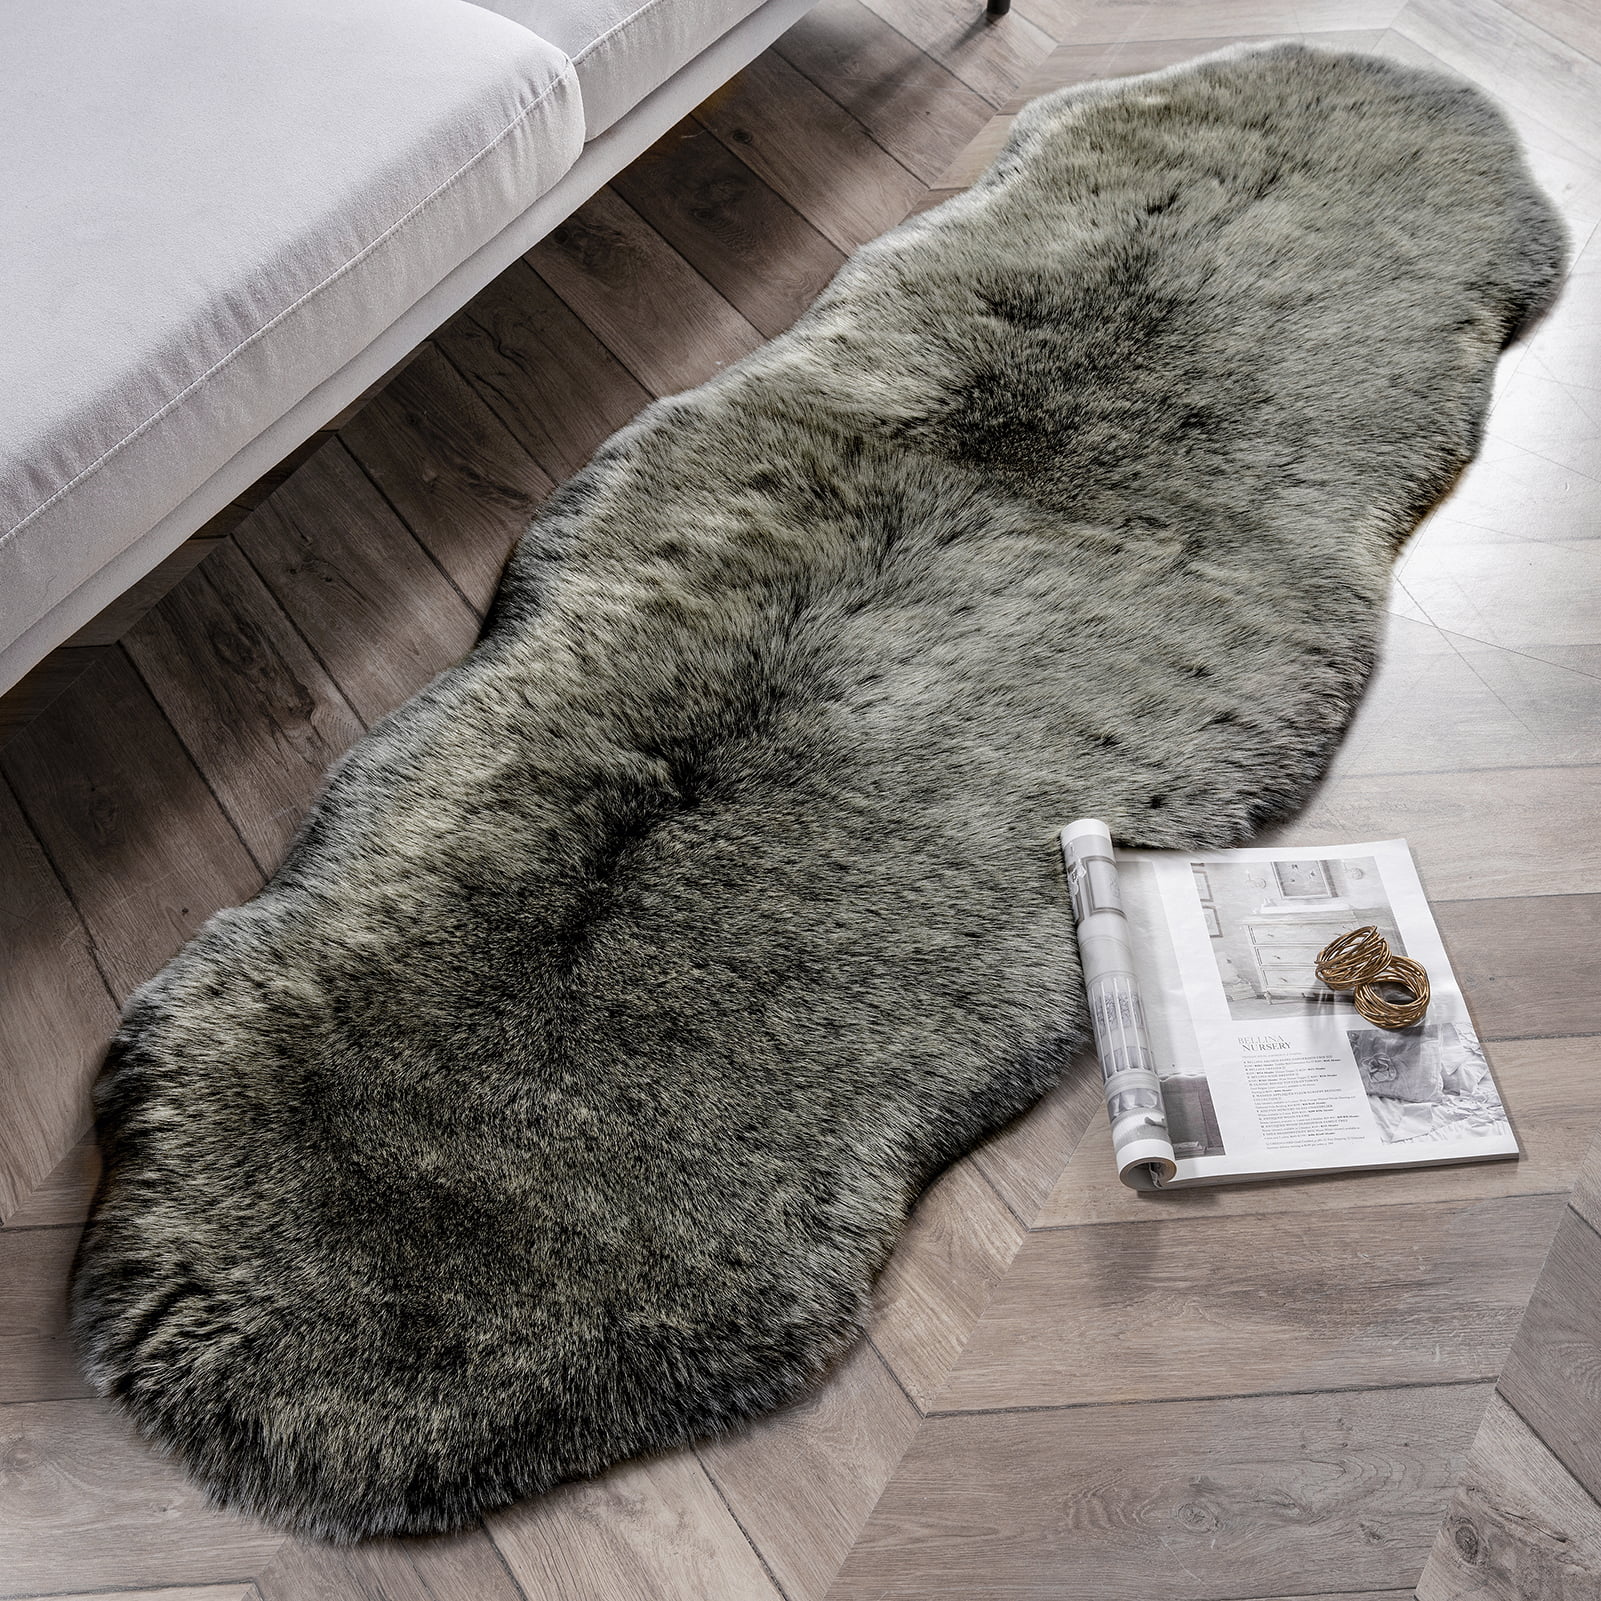 Phantoscope Ultra Soft Faux Fox Fur Rug Chair Couch Cover Area Rug for Bedroom Floor Sofa Living Room 2 x 3 Feet Black White